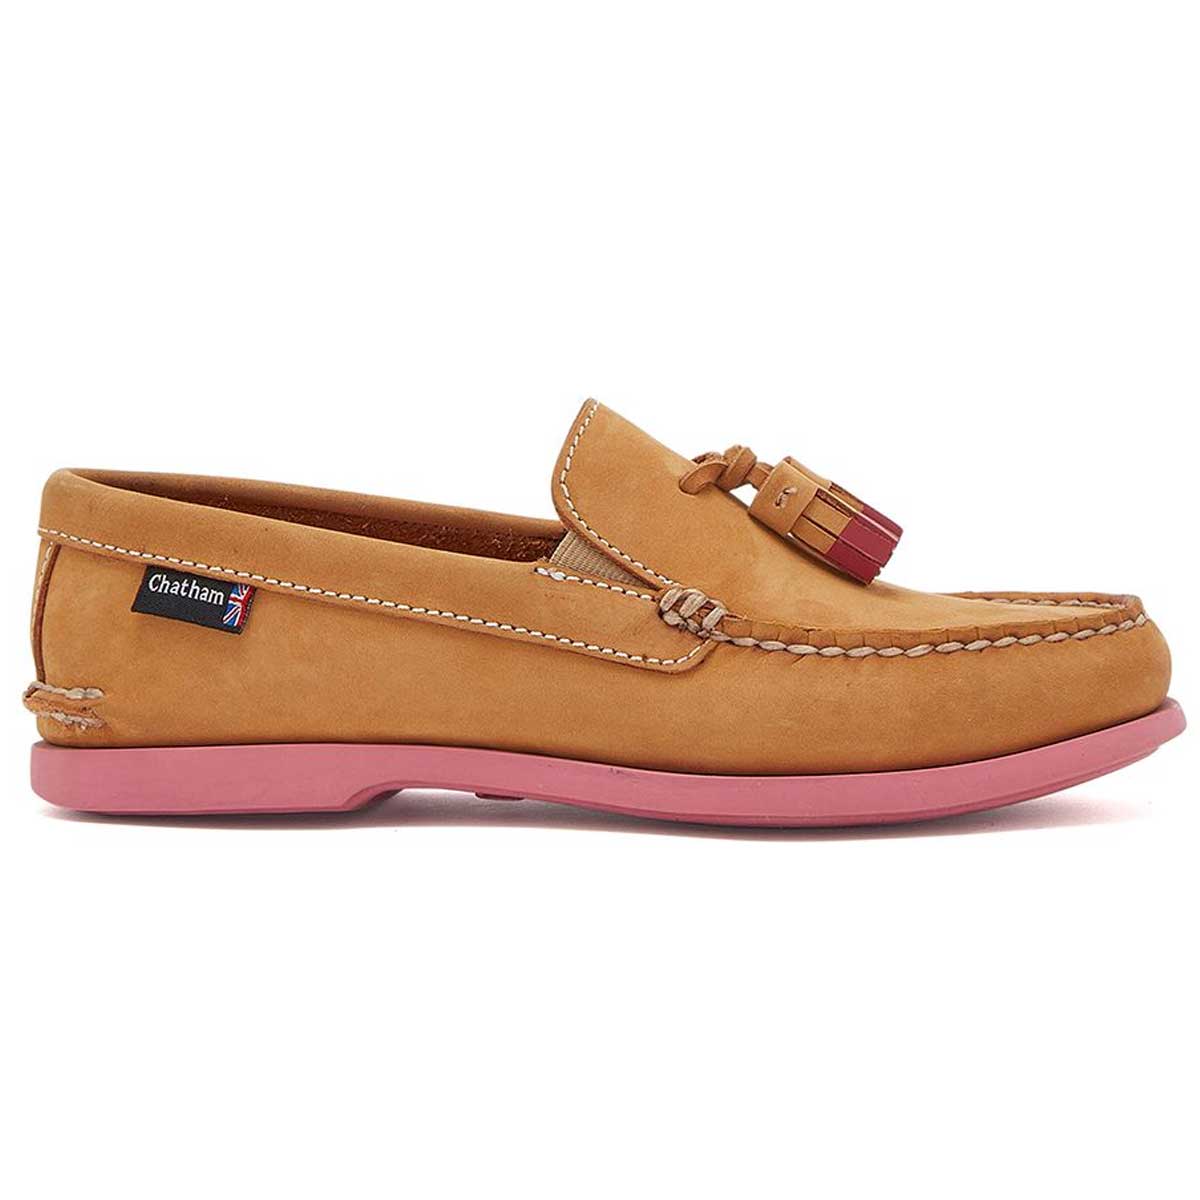 CHATHAM Crete G2 Leather Tassel Loafers - Women's - Tan / Pink